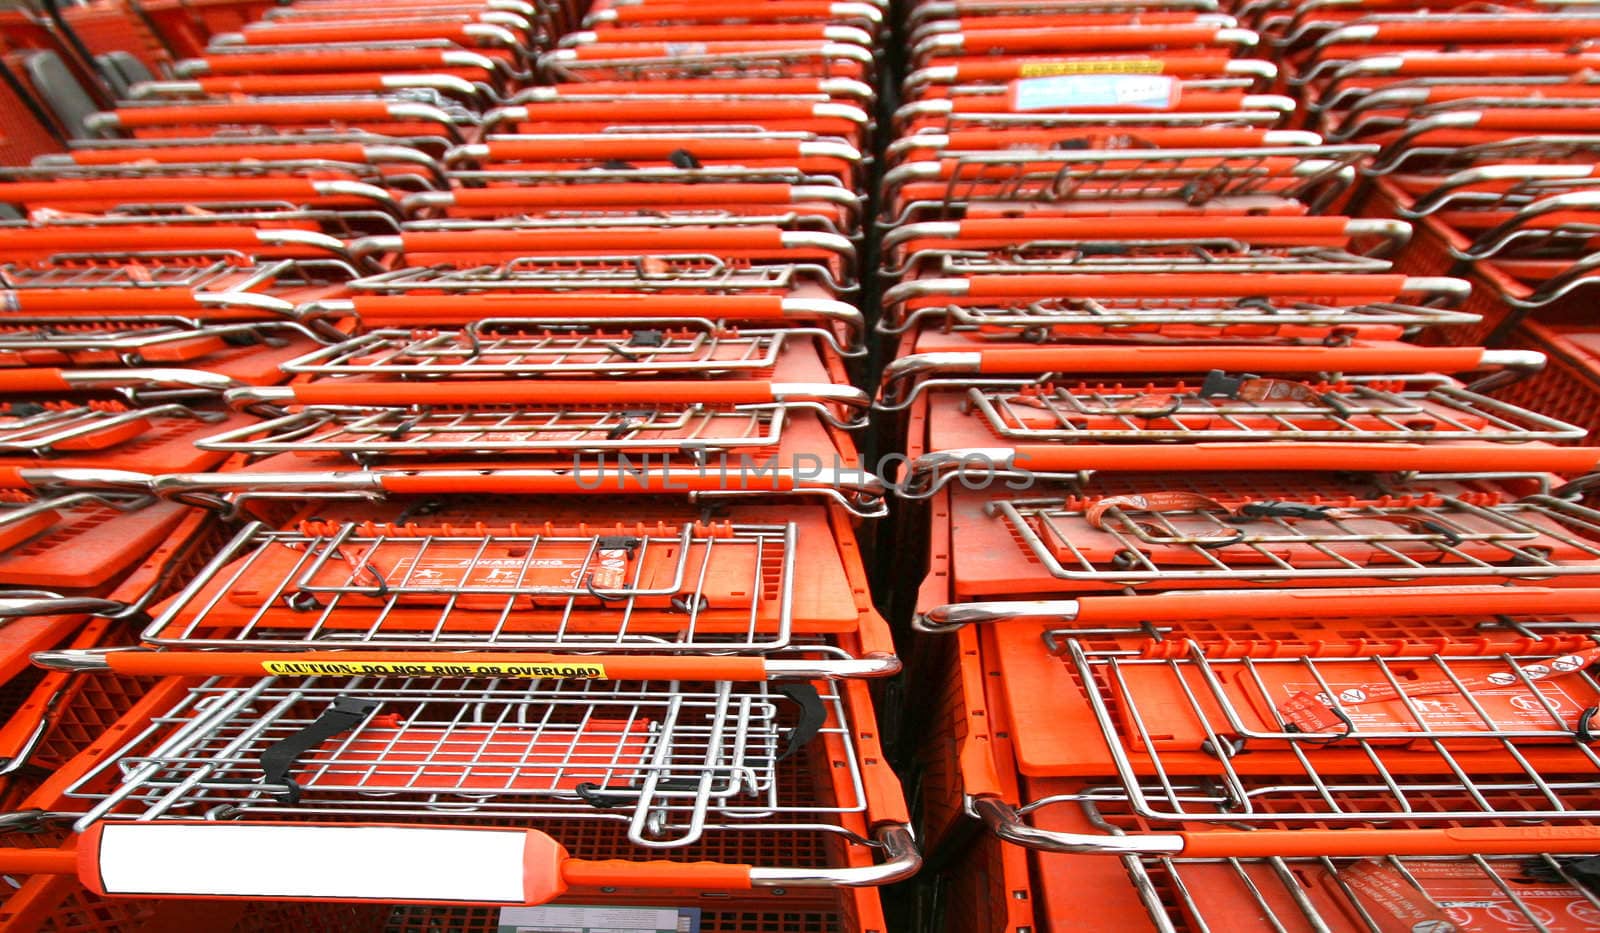 Four lines of chopping carts for a retailer